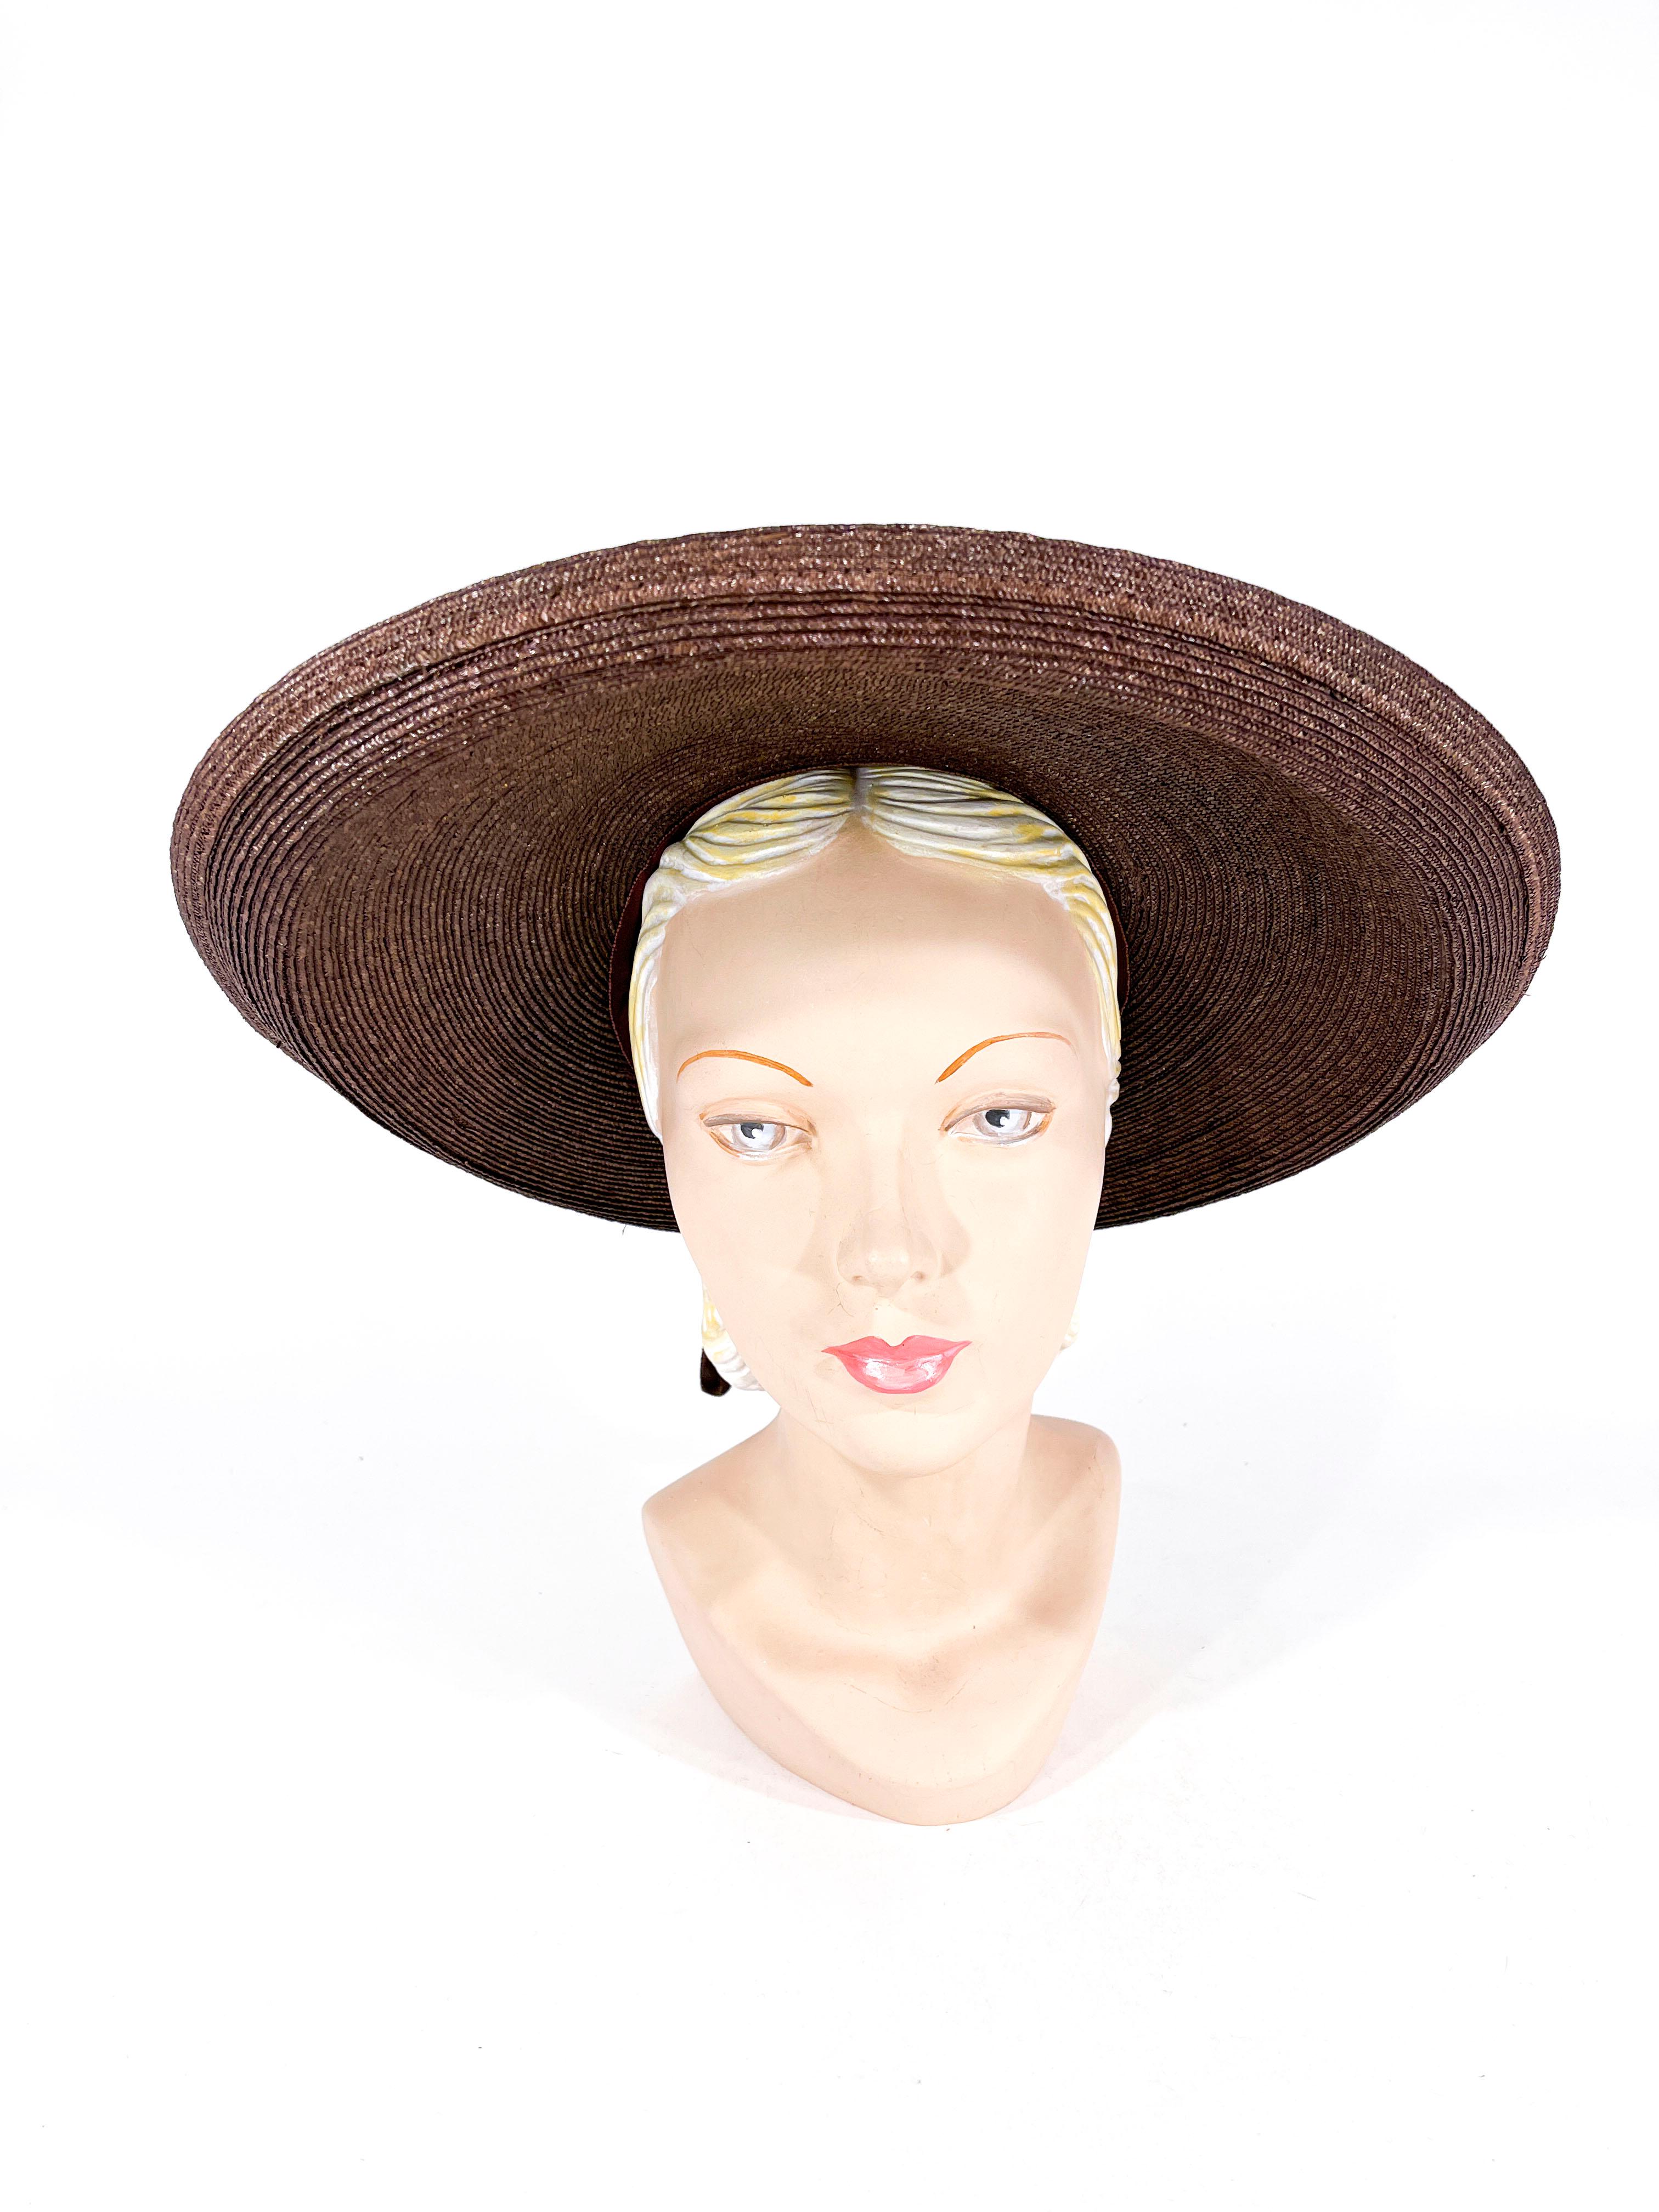 1930s cocoa brown woven straw picture sun hat with a rolled hatband of straw and velvet ribbon finished with a bow and drape on the back. The wide brim is turned up along the edges. The interior of the crown is unlined and finished with a grosgrain